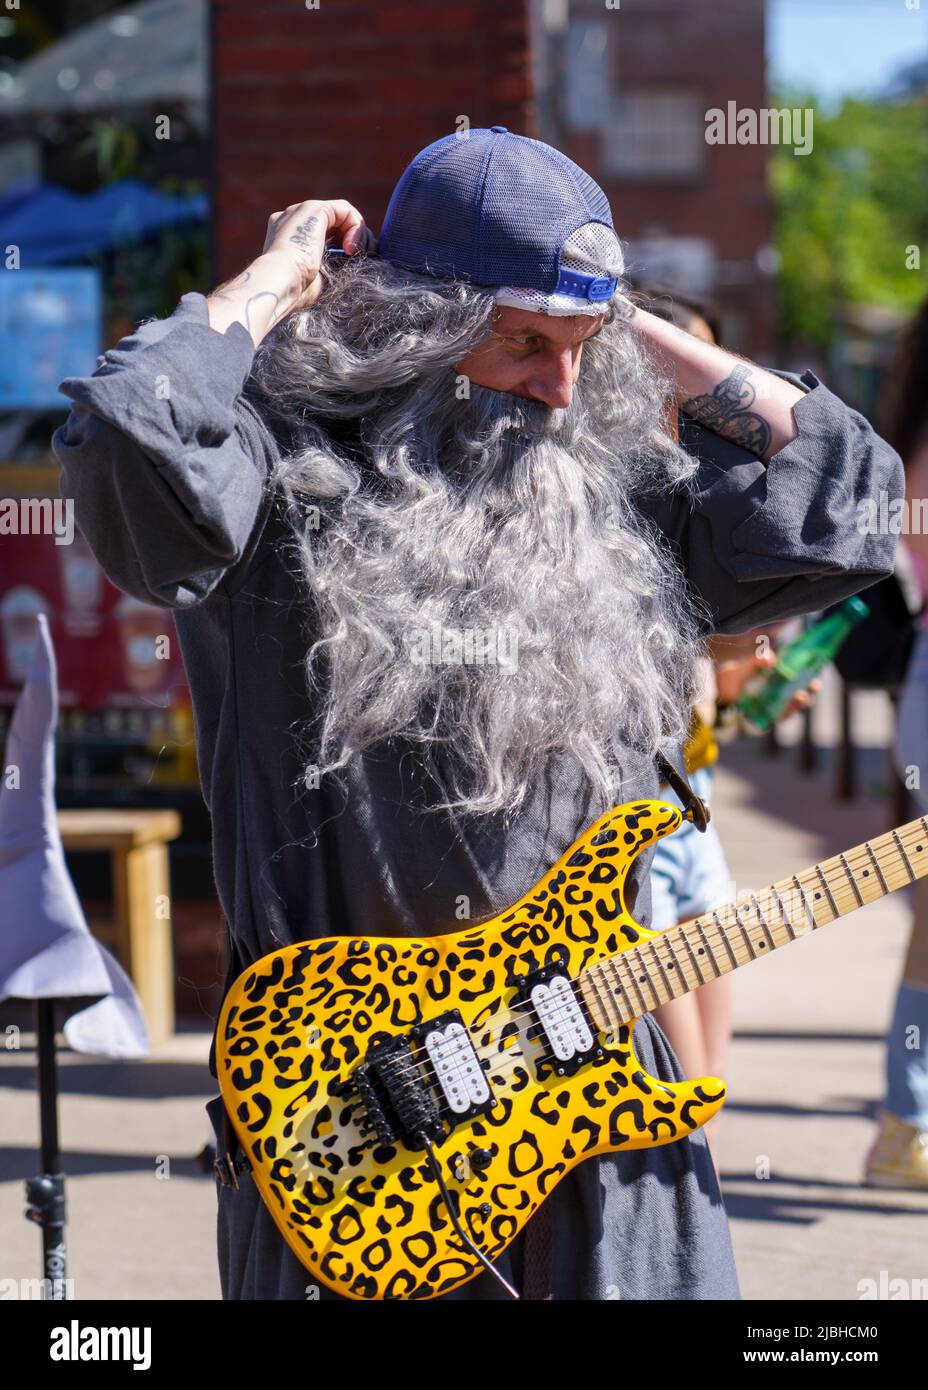 A man in stage clothes performs in Dundas St. West during the Do West Festival. Stock Photo